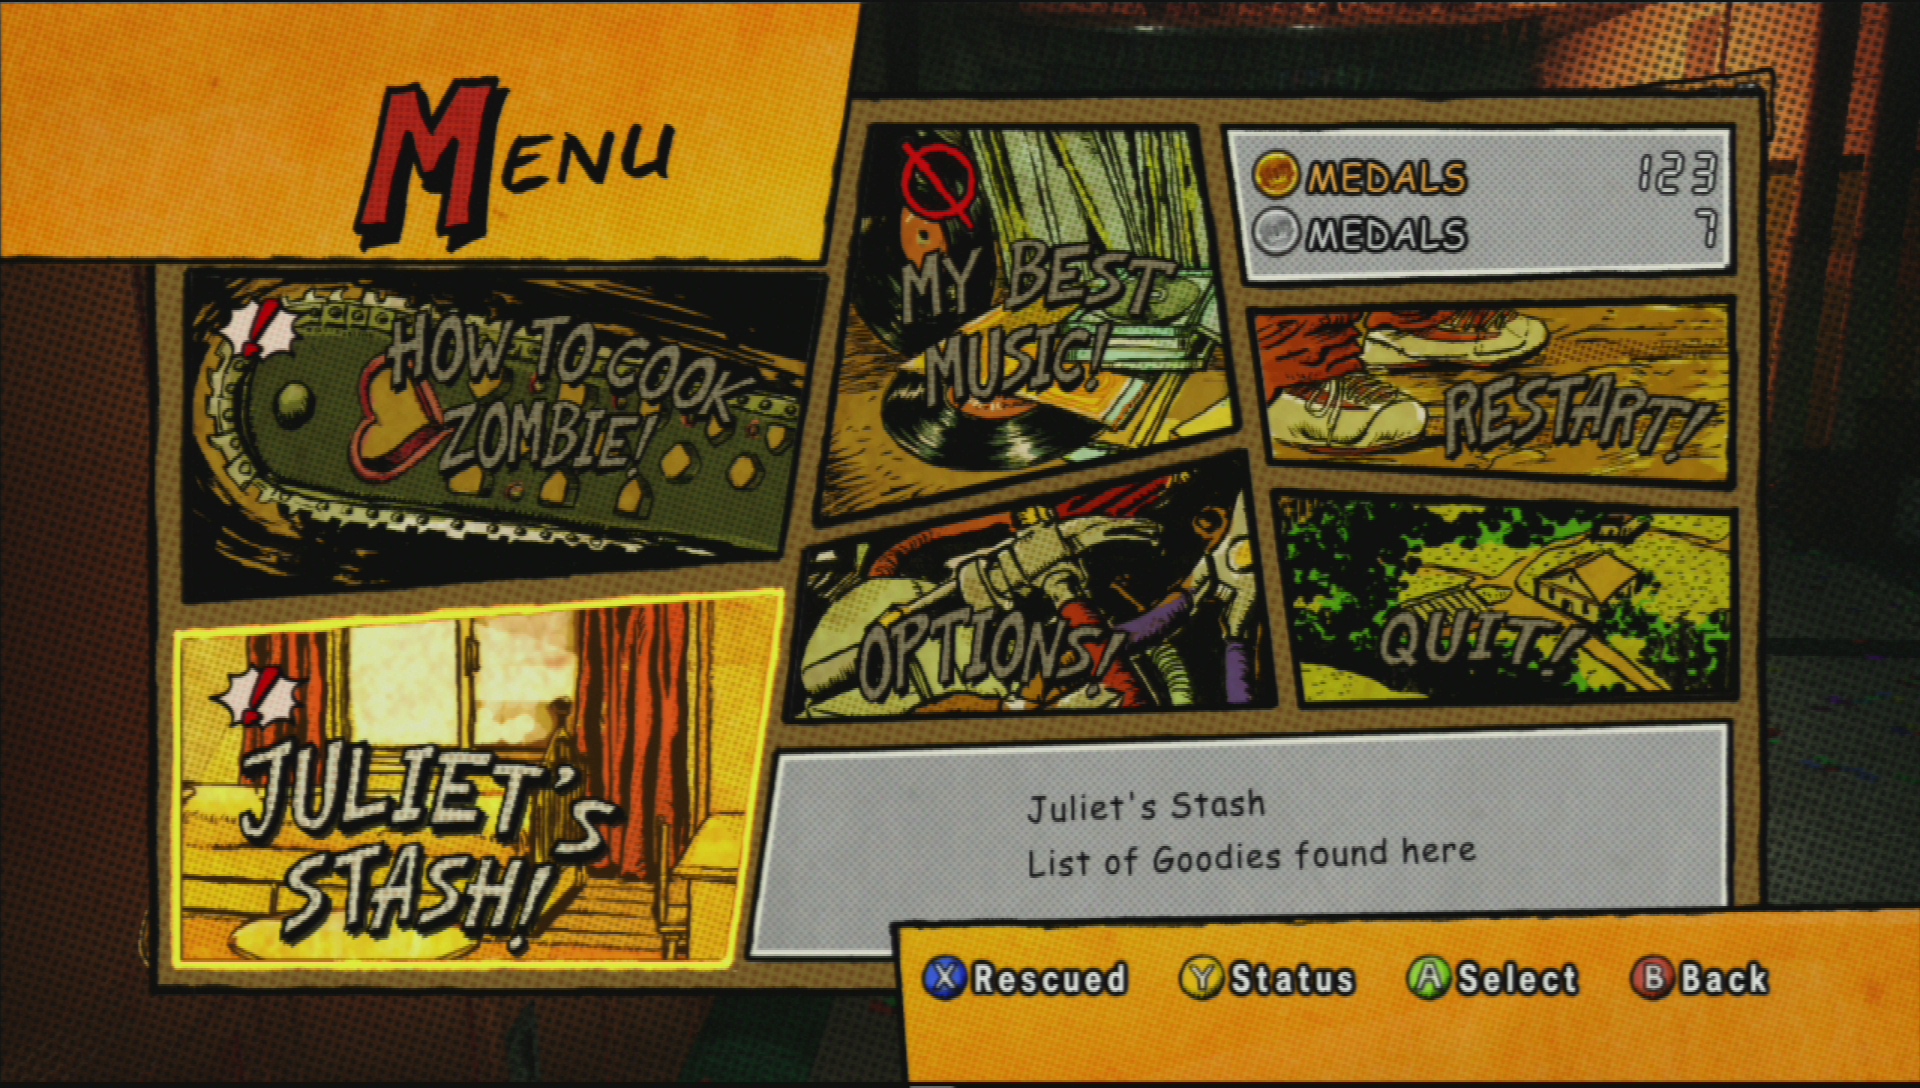 The pause menu in lollipop chainsaw